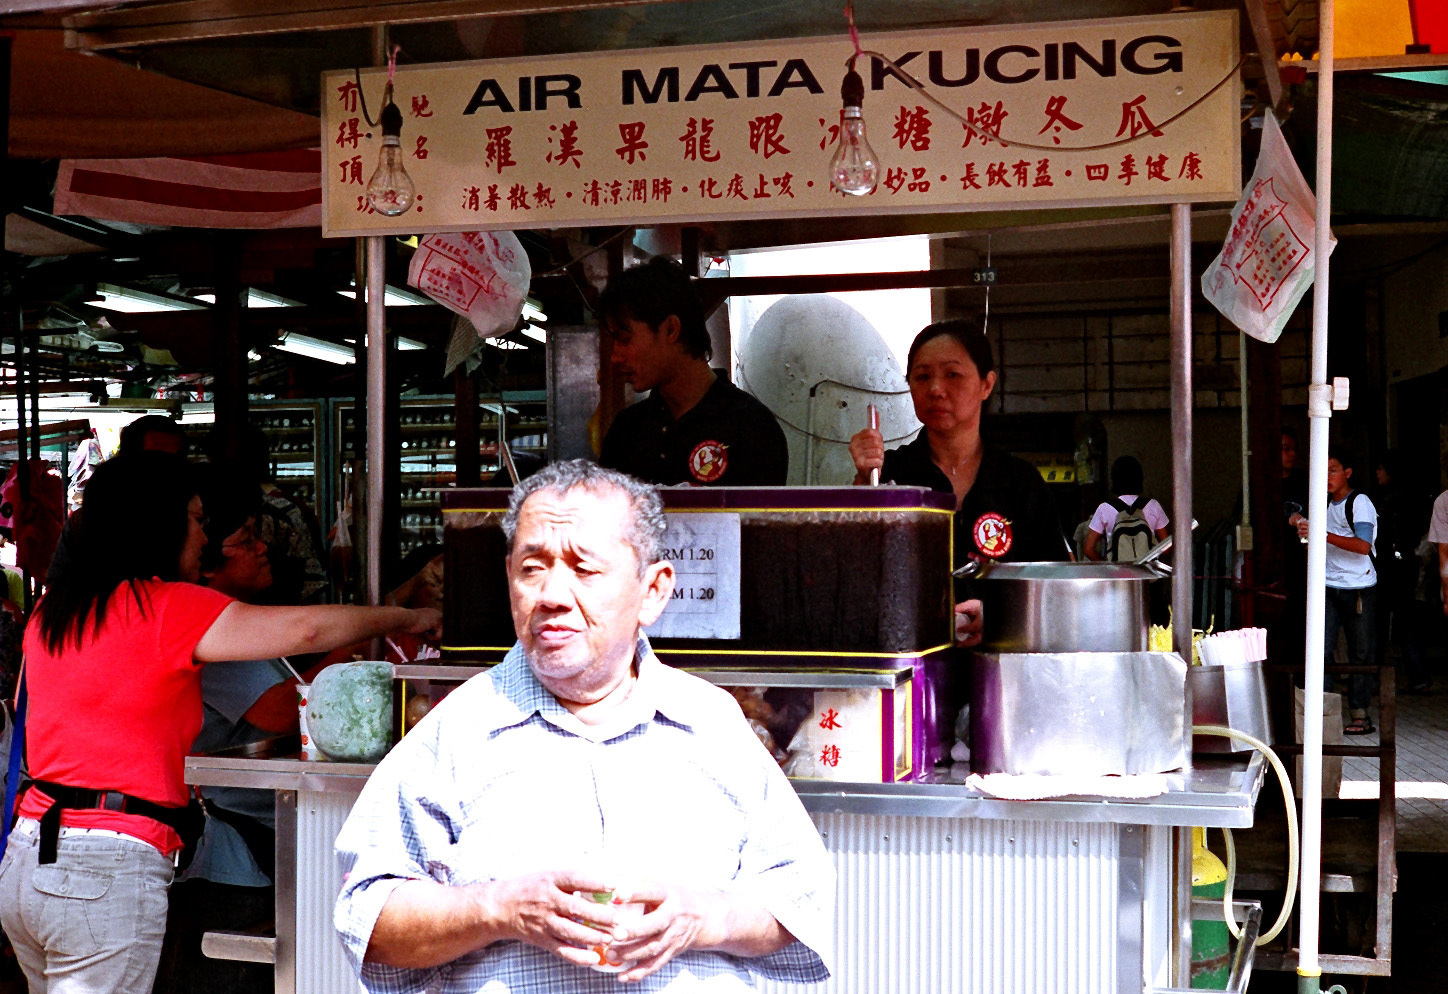 A color photograph of a person standing in front of a Malaysian beverage stall with signs on it